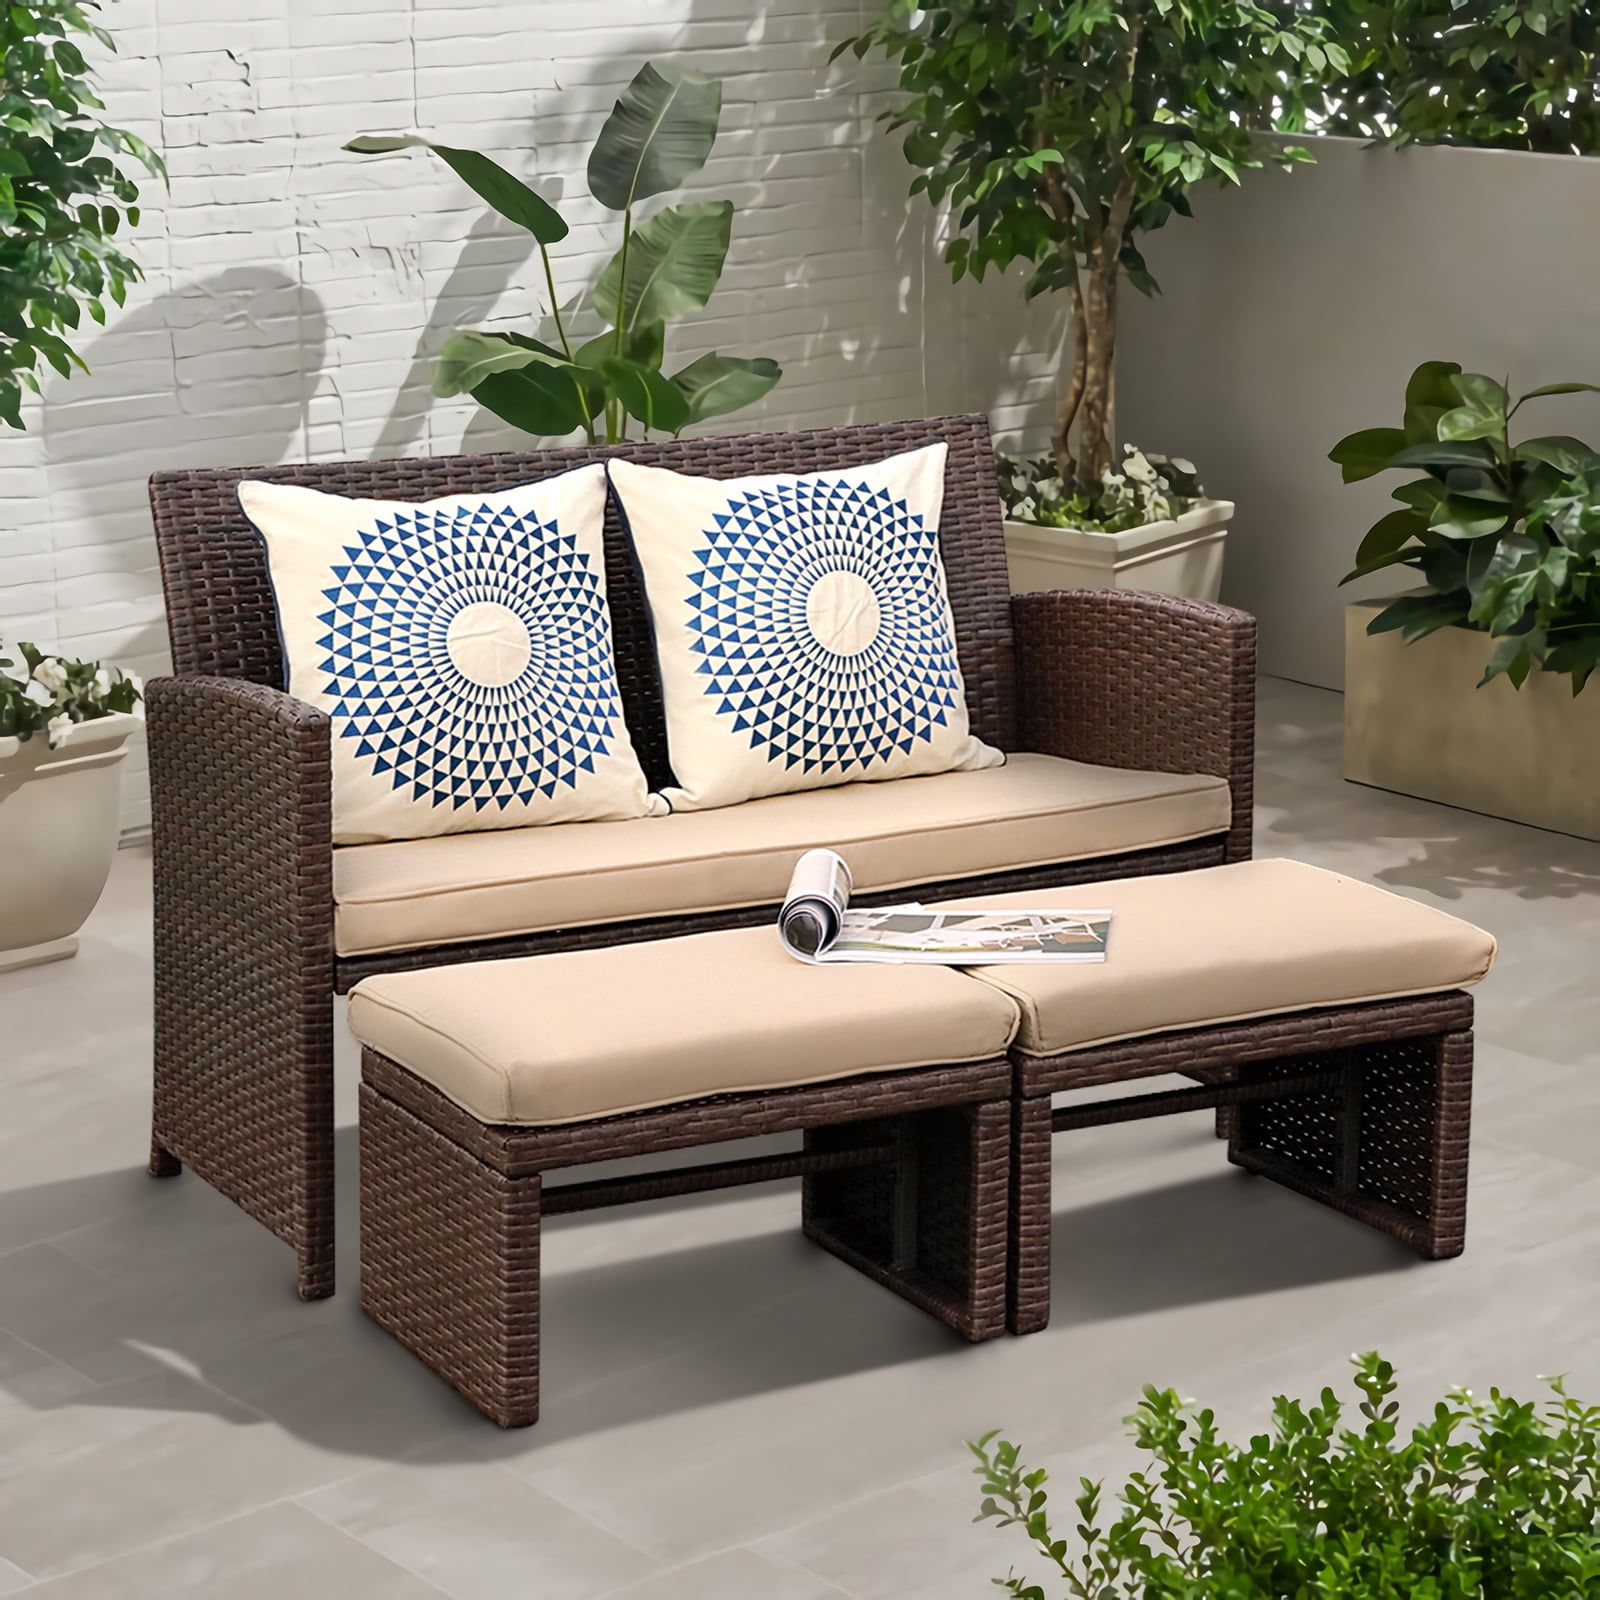 Balcony Furniture Set With Beige Cushions Throughout Famous Oc Orange Casual 3 Piece Outdoor Loveseat, Patio Furniture Set, With  Ottoman/side Table, Brown Rattan, Beige Cushion – Walmart (View 6 of 15)